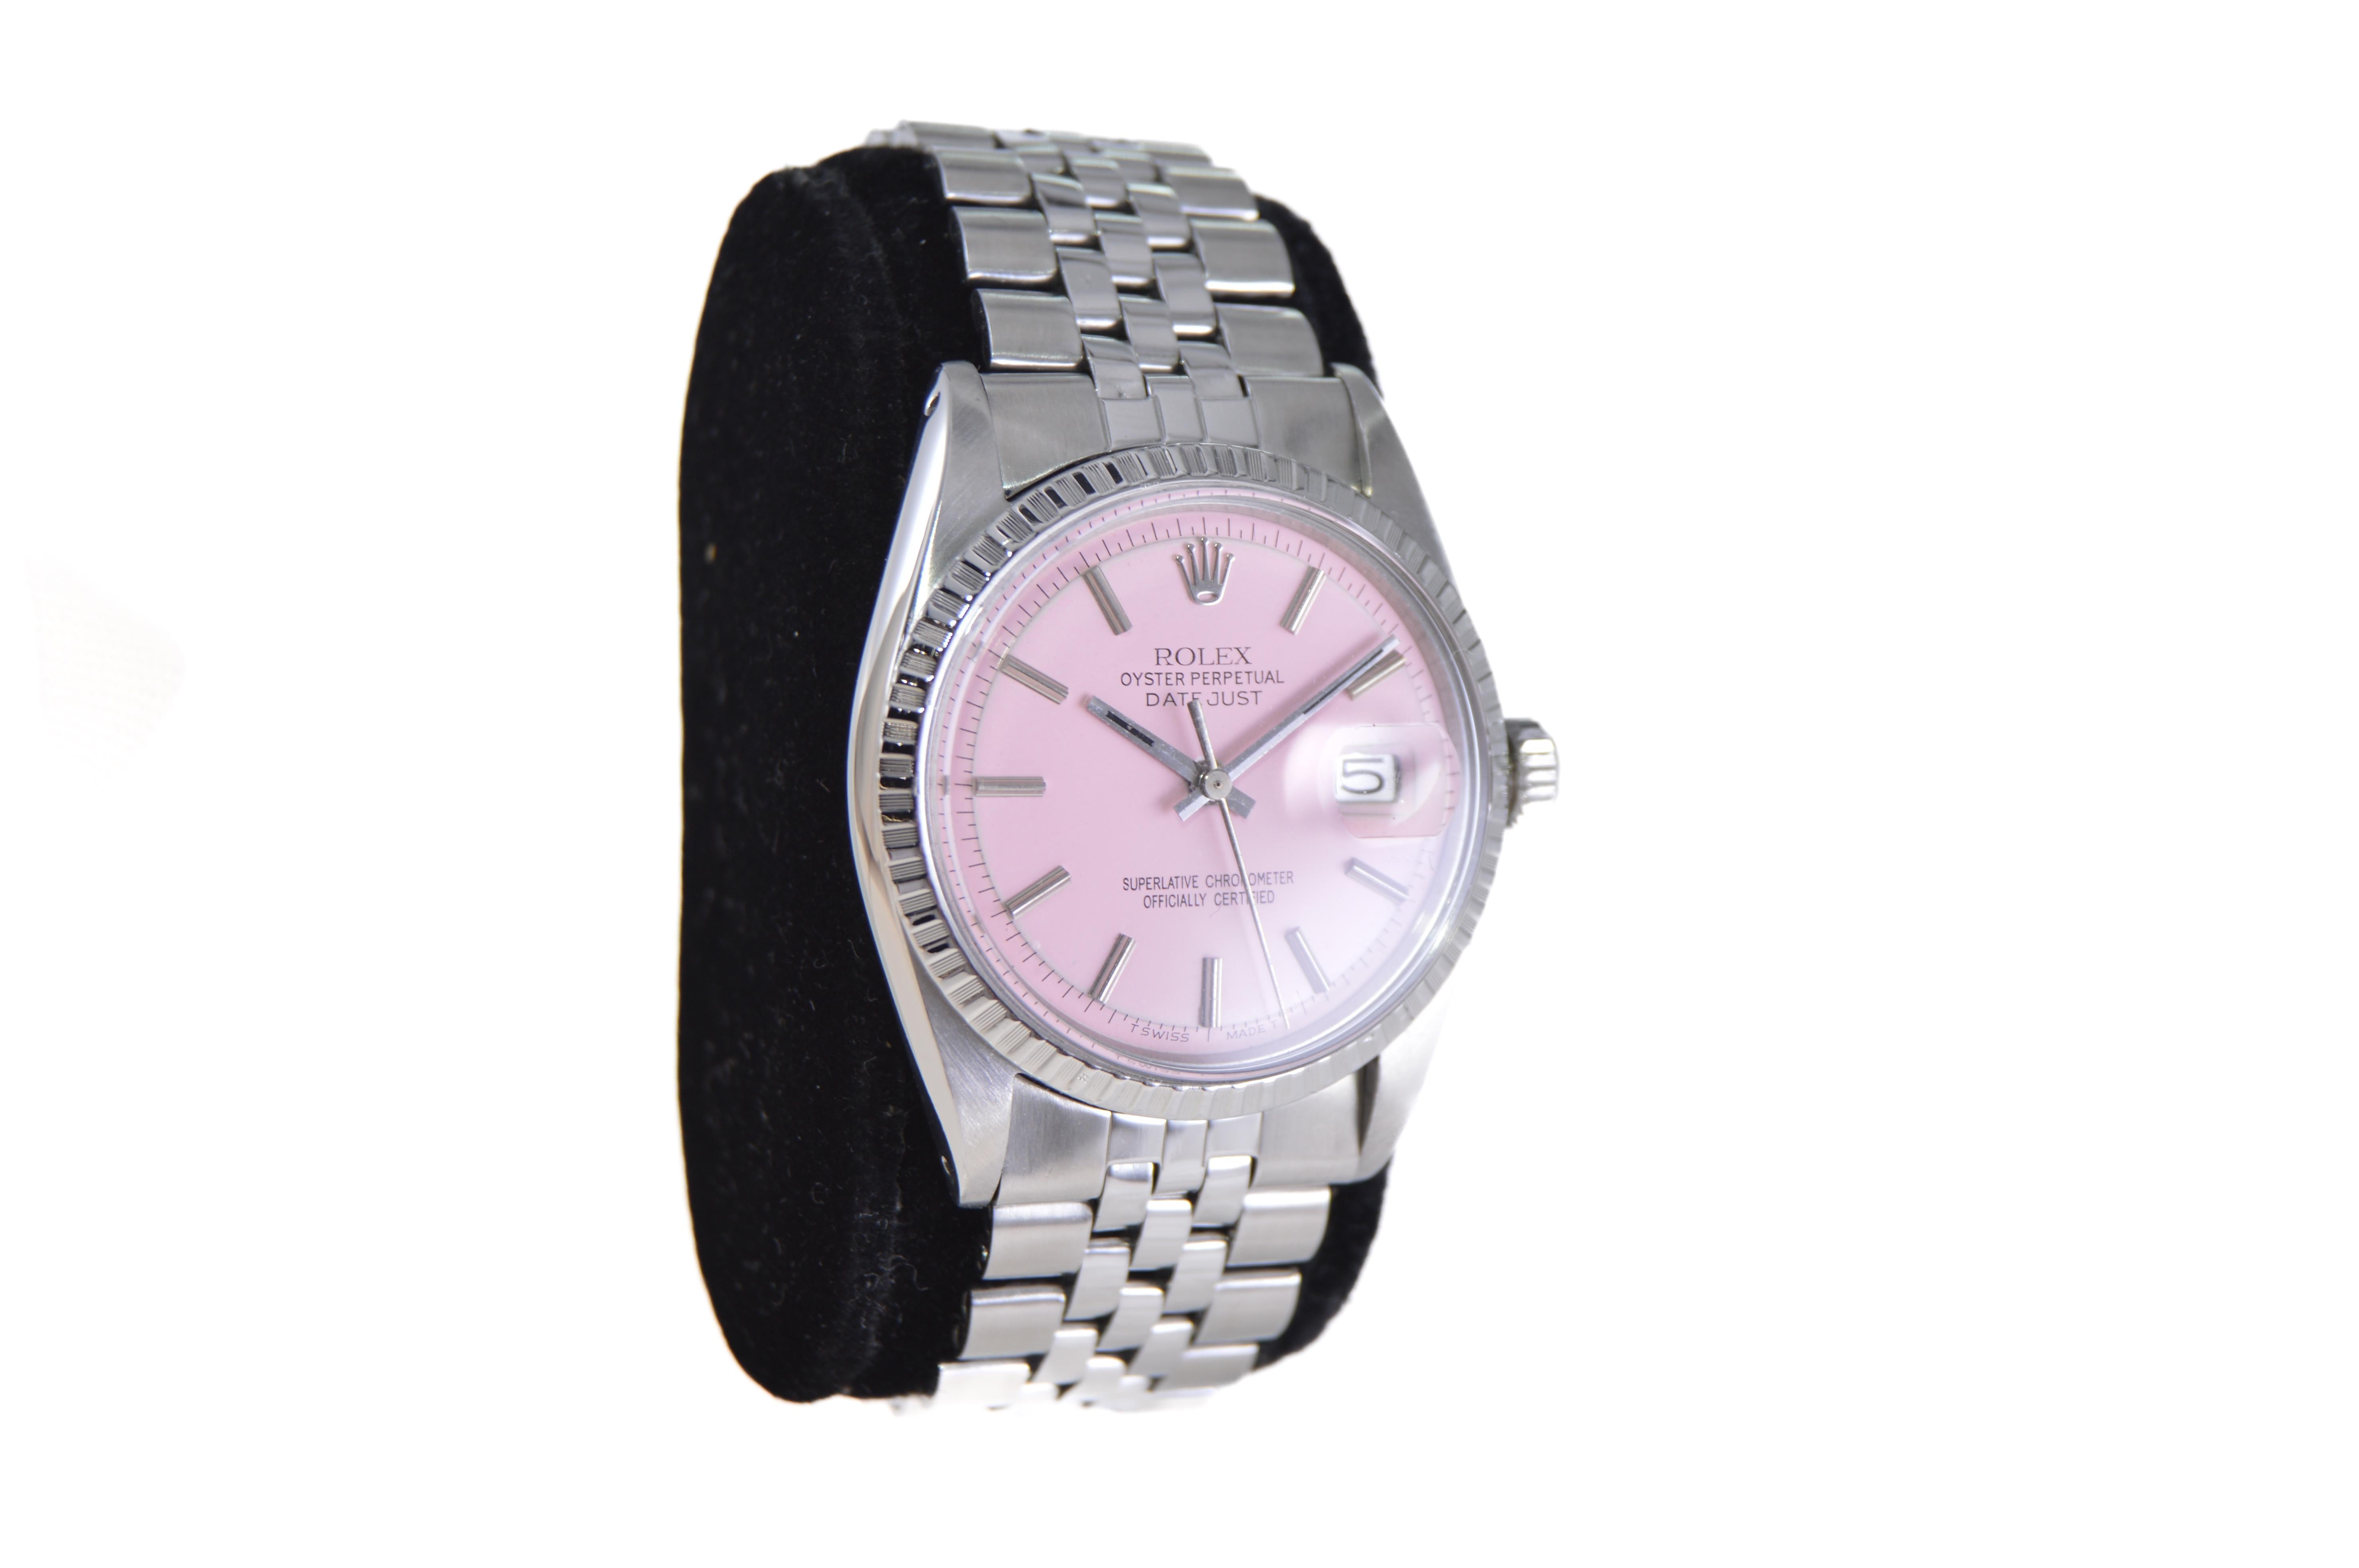 FACTORY / HOUSE: Rolex Watch Company
STYLE / REFERENCE: Oyster Perpetual Datejust / Reference 1603
METAL / MATERIAL: Stainless Steel
CIRCA / YEAR: 1970's
DIMENSIONS / SIZE: Length 44mm X Diameter 36mm
MOVEMENT / CALIBER: Perpetual Winding / 26